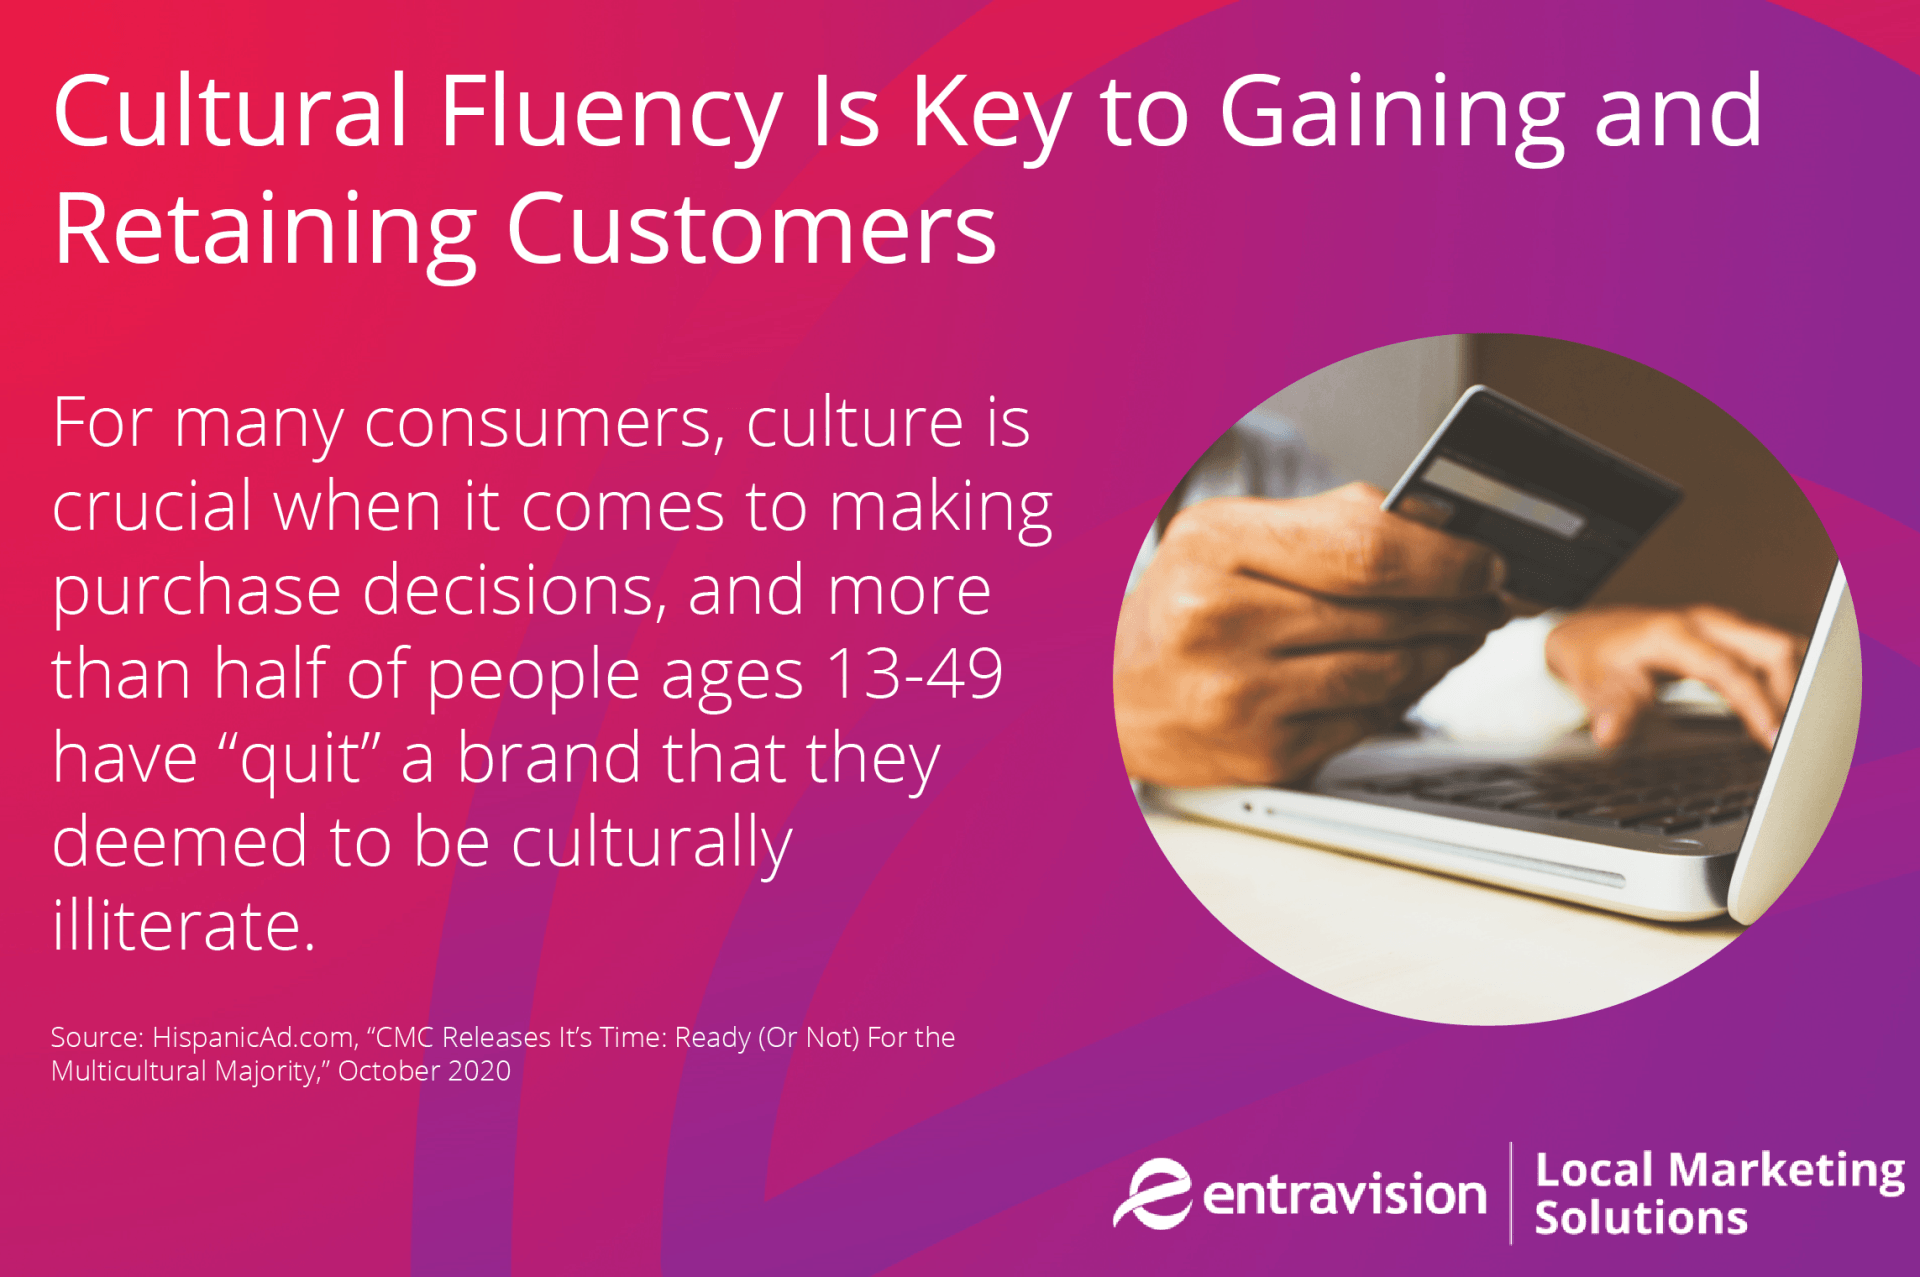 An infographic with a picture of a credit card and laptop show that cultural fluency is key to gaining and retaining multicultural customers. Picking a digital marketing agency in San Diego is a great way to grow your business with Hispanic marketing!